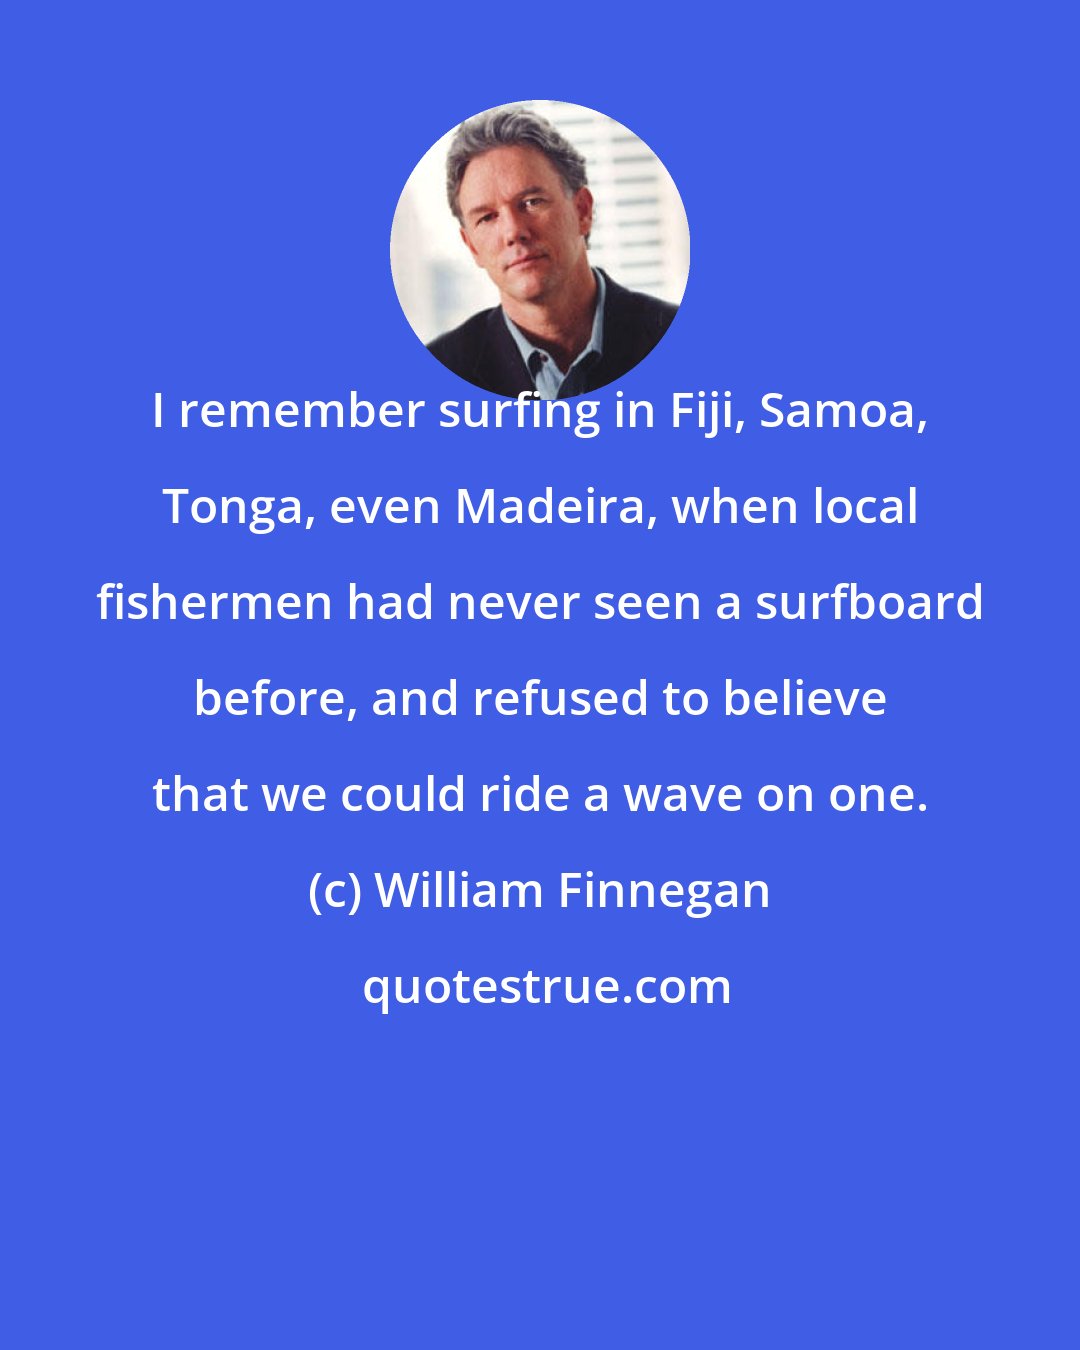 William Finnegan: I remember surfing in Fiji, Samoa, Tonga, even Madeira, when local fishermen had never seen a surfboard before, and refused to believe that we could ride a wave on one.